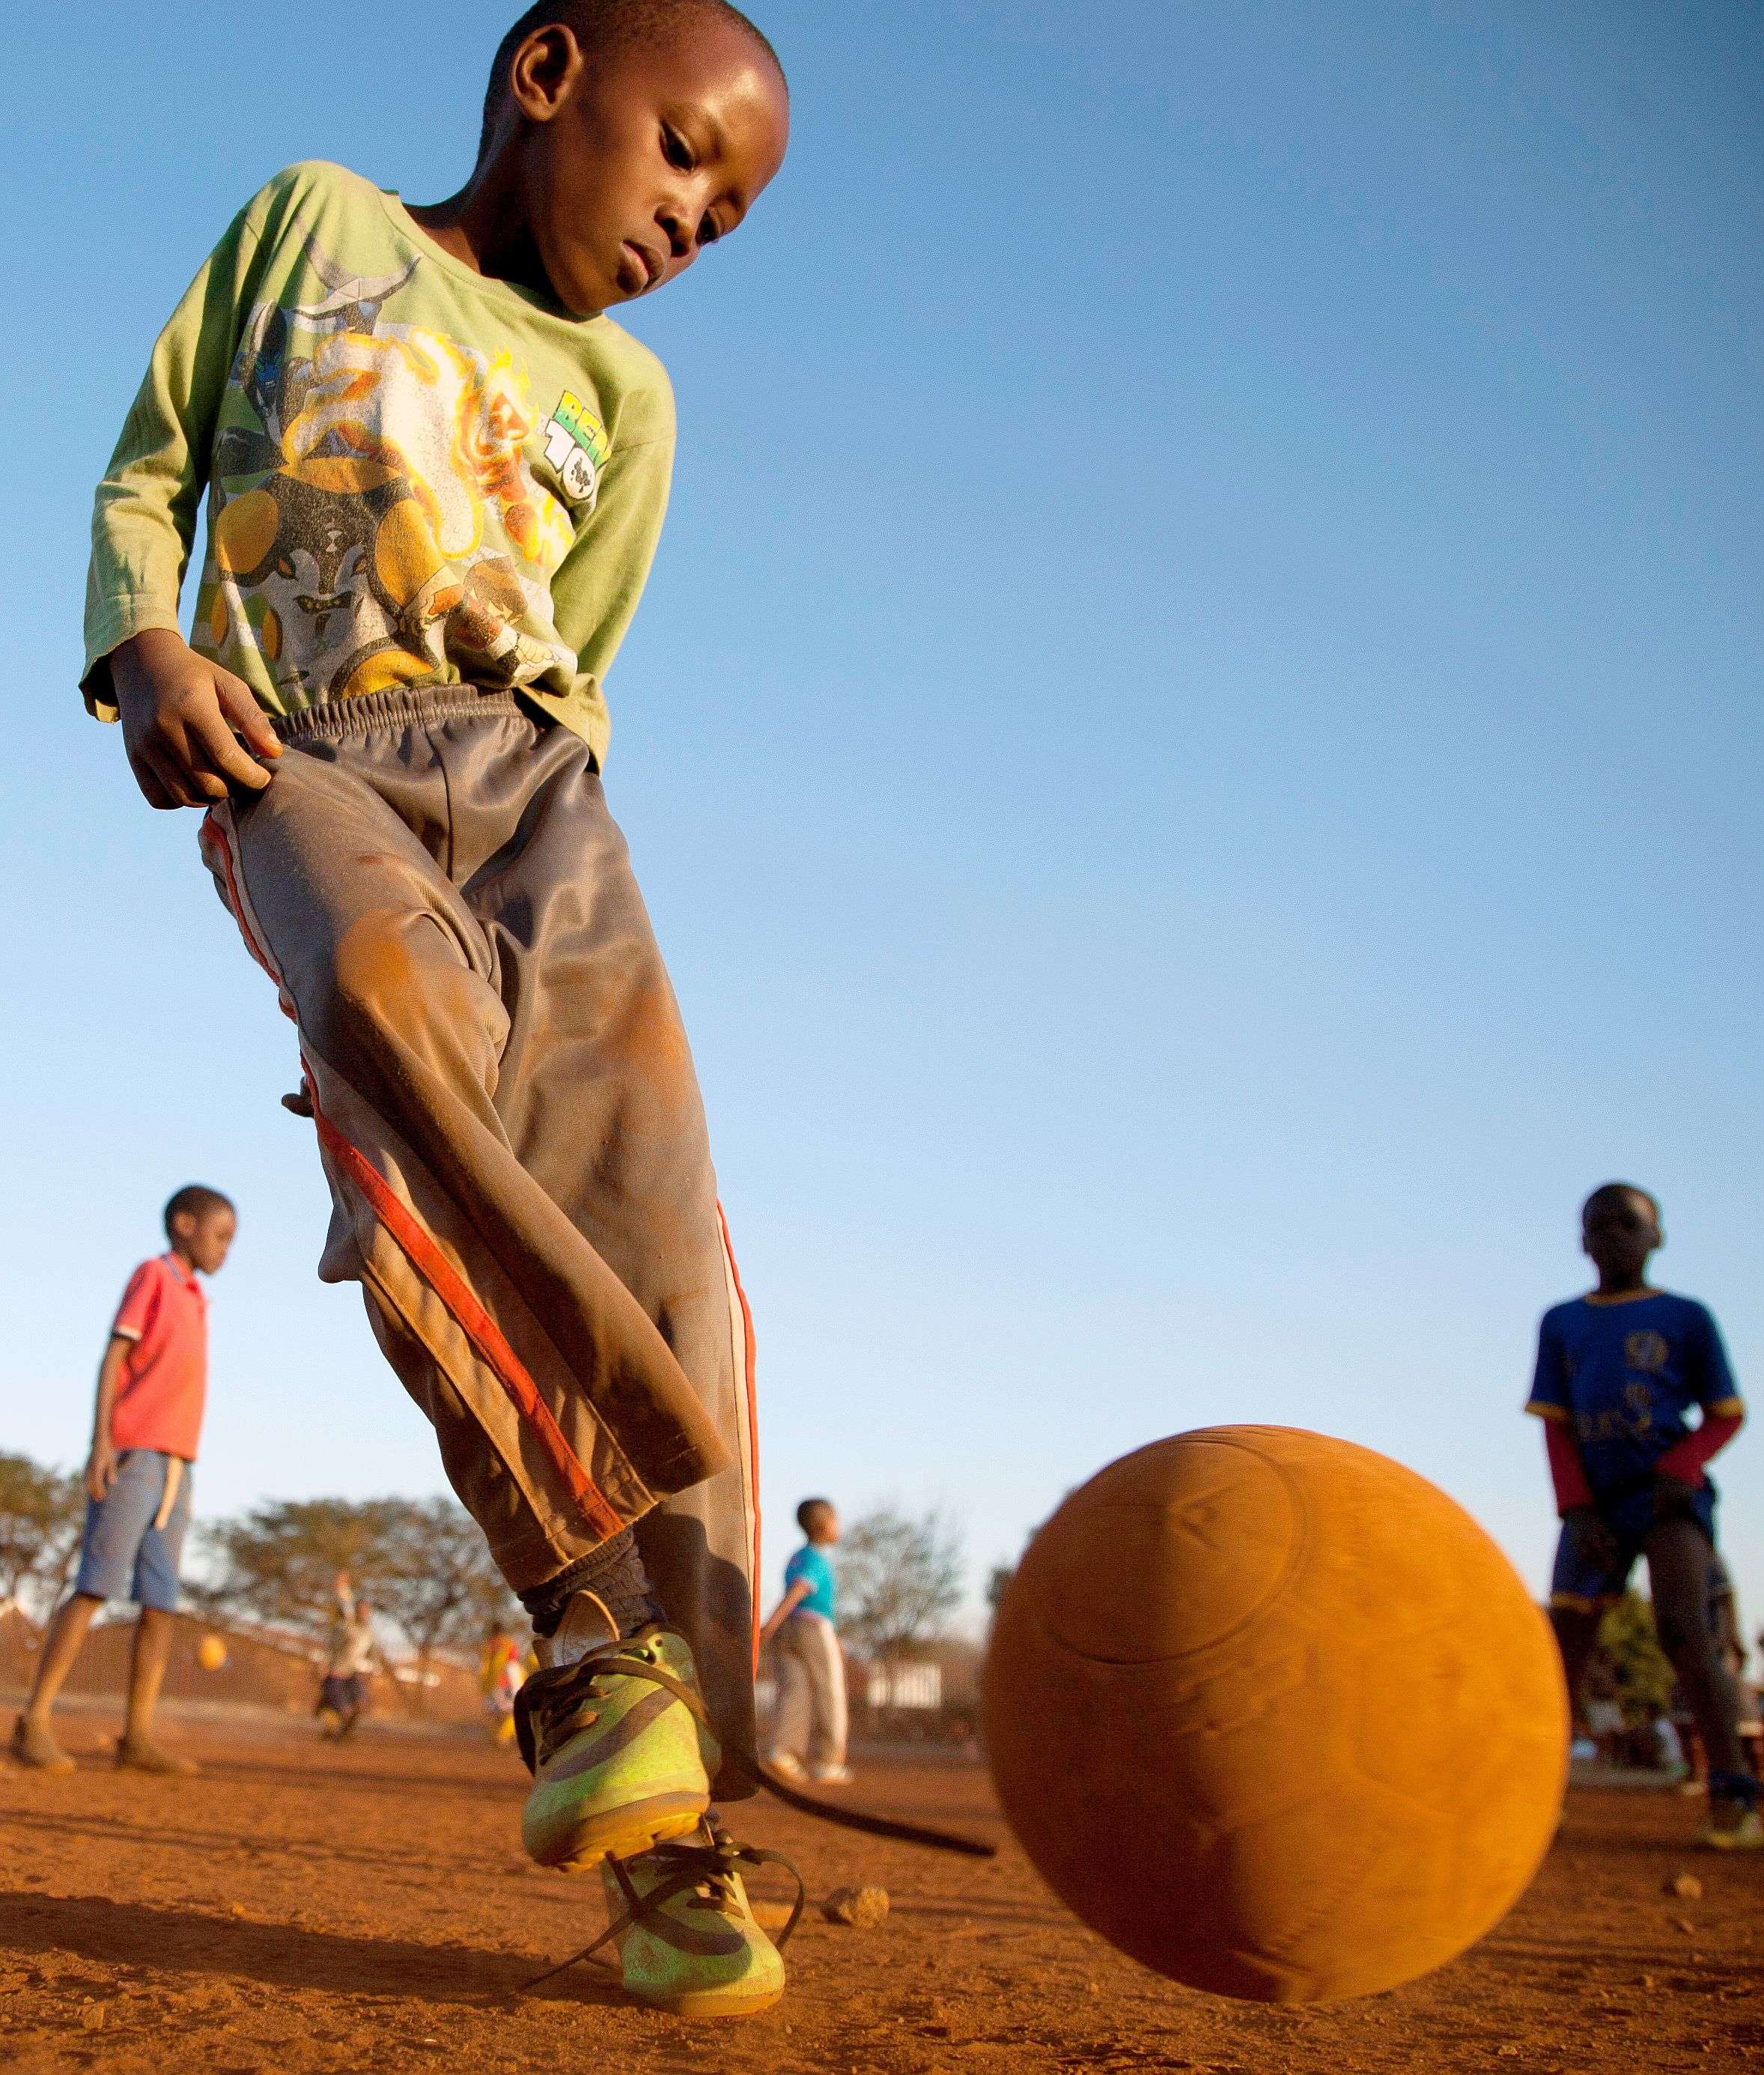 Young boys play soccer on a dusty field in Thokoza township east of Johannesburg, South Africa.(AP/Themba Hadebe) 